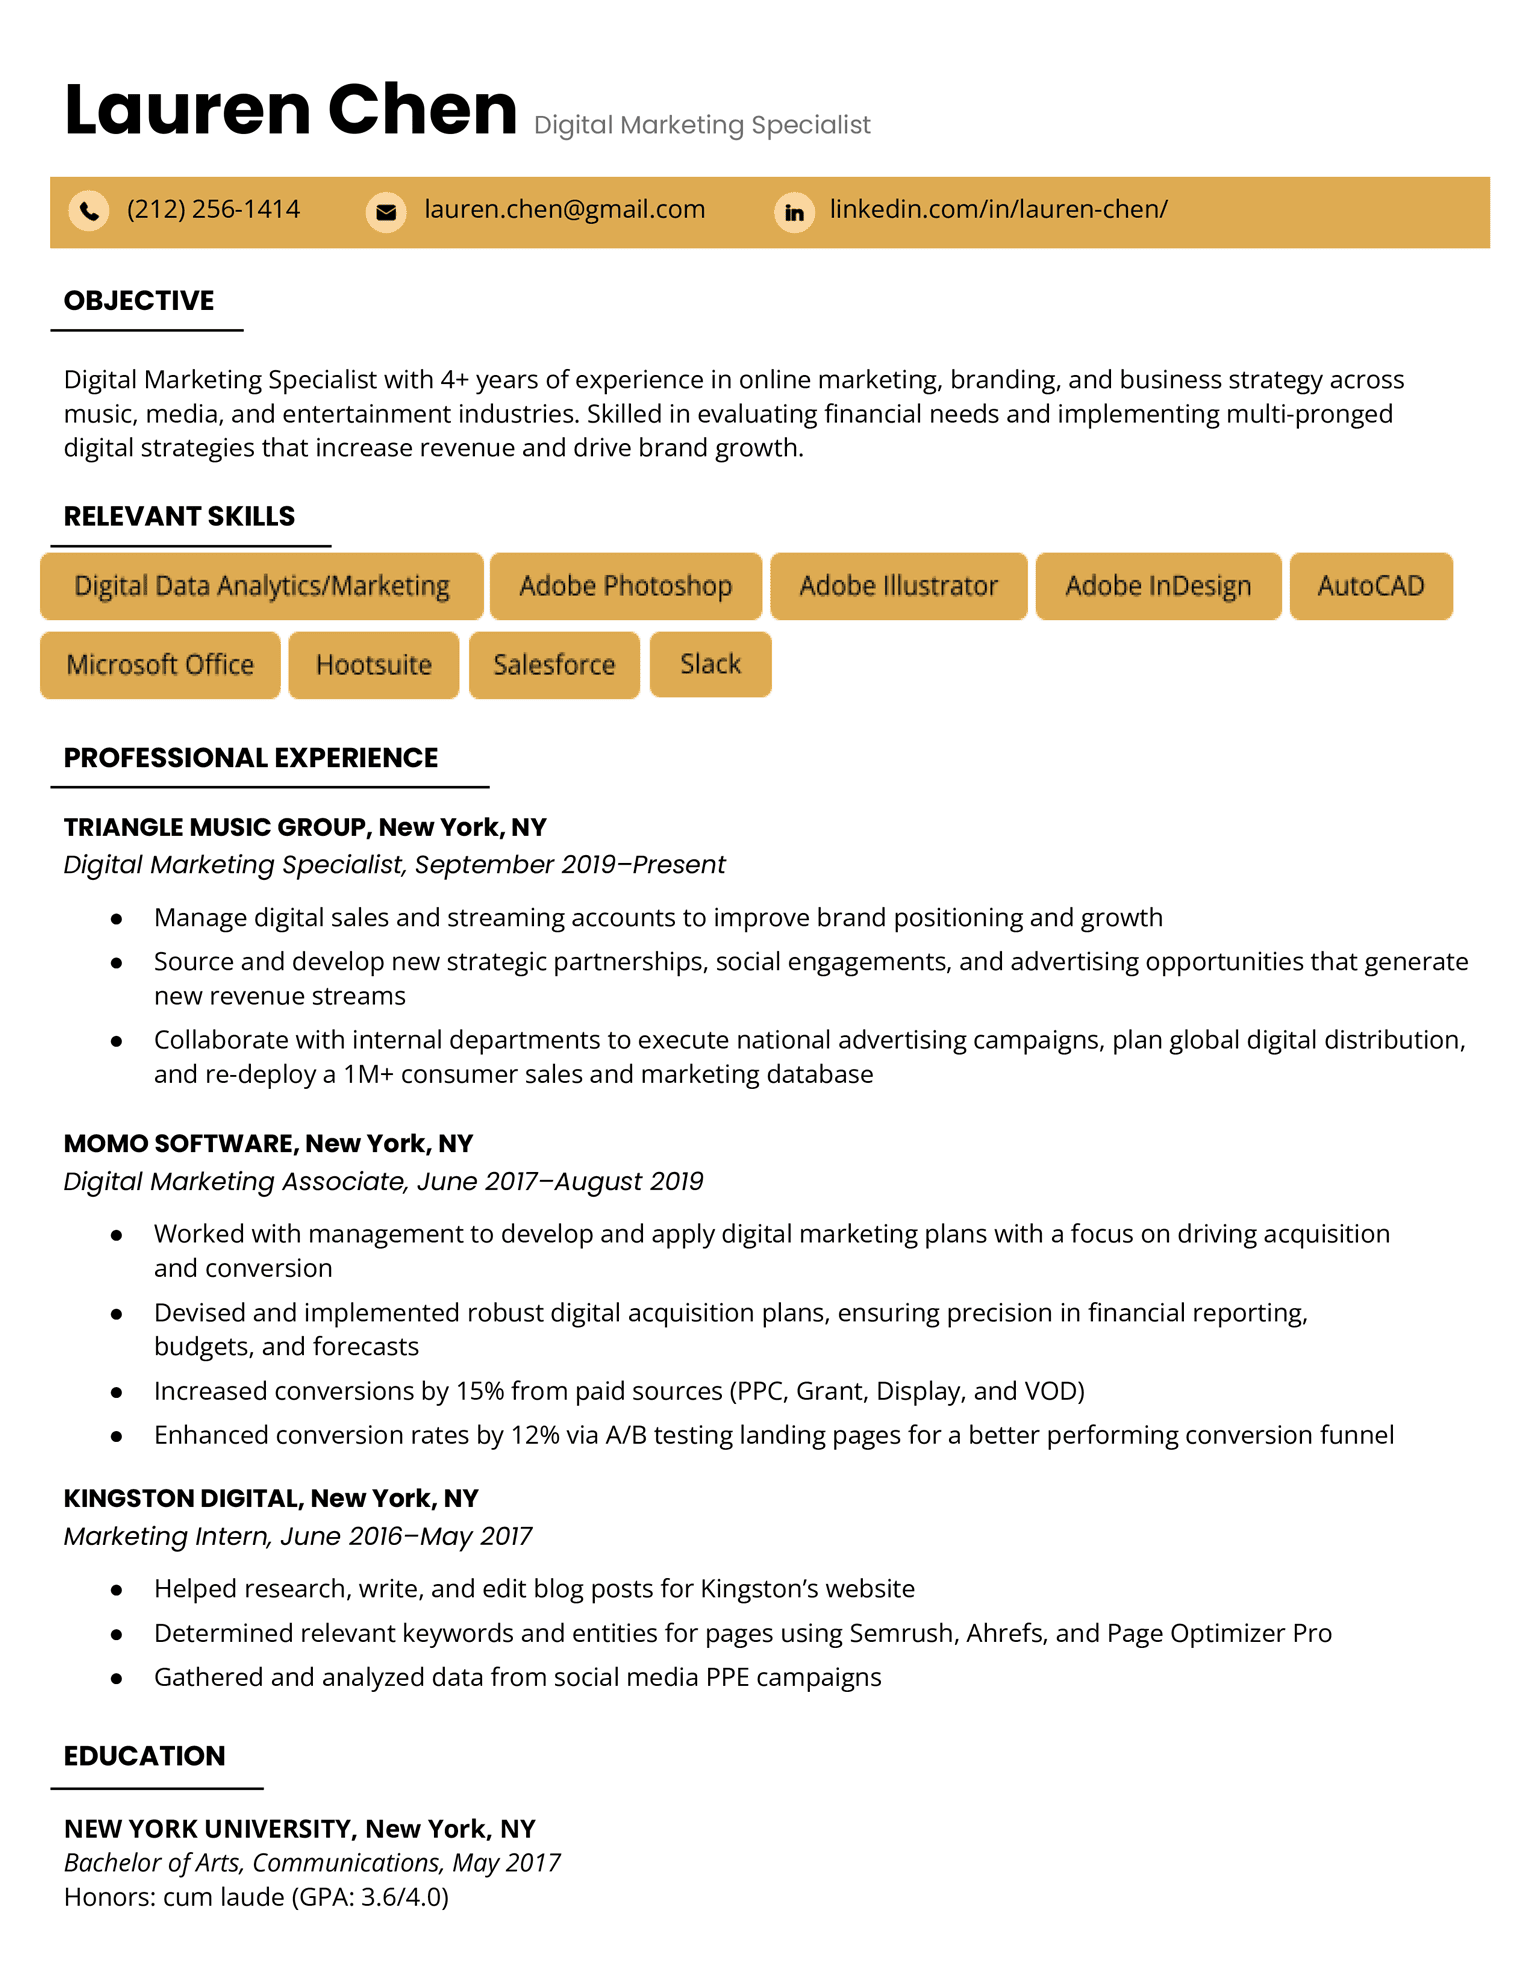 The Advanced resume template for Google Docs in yellow.